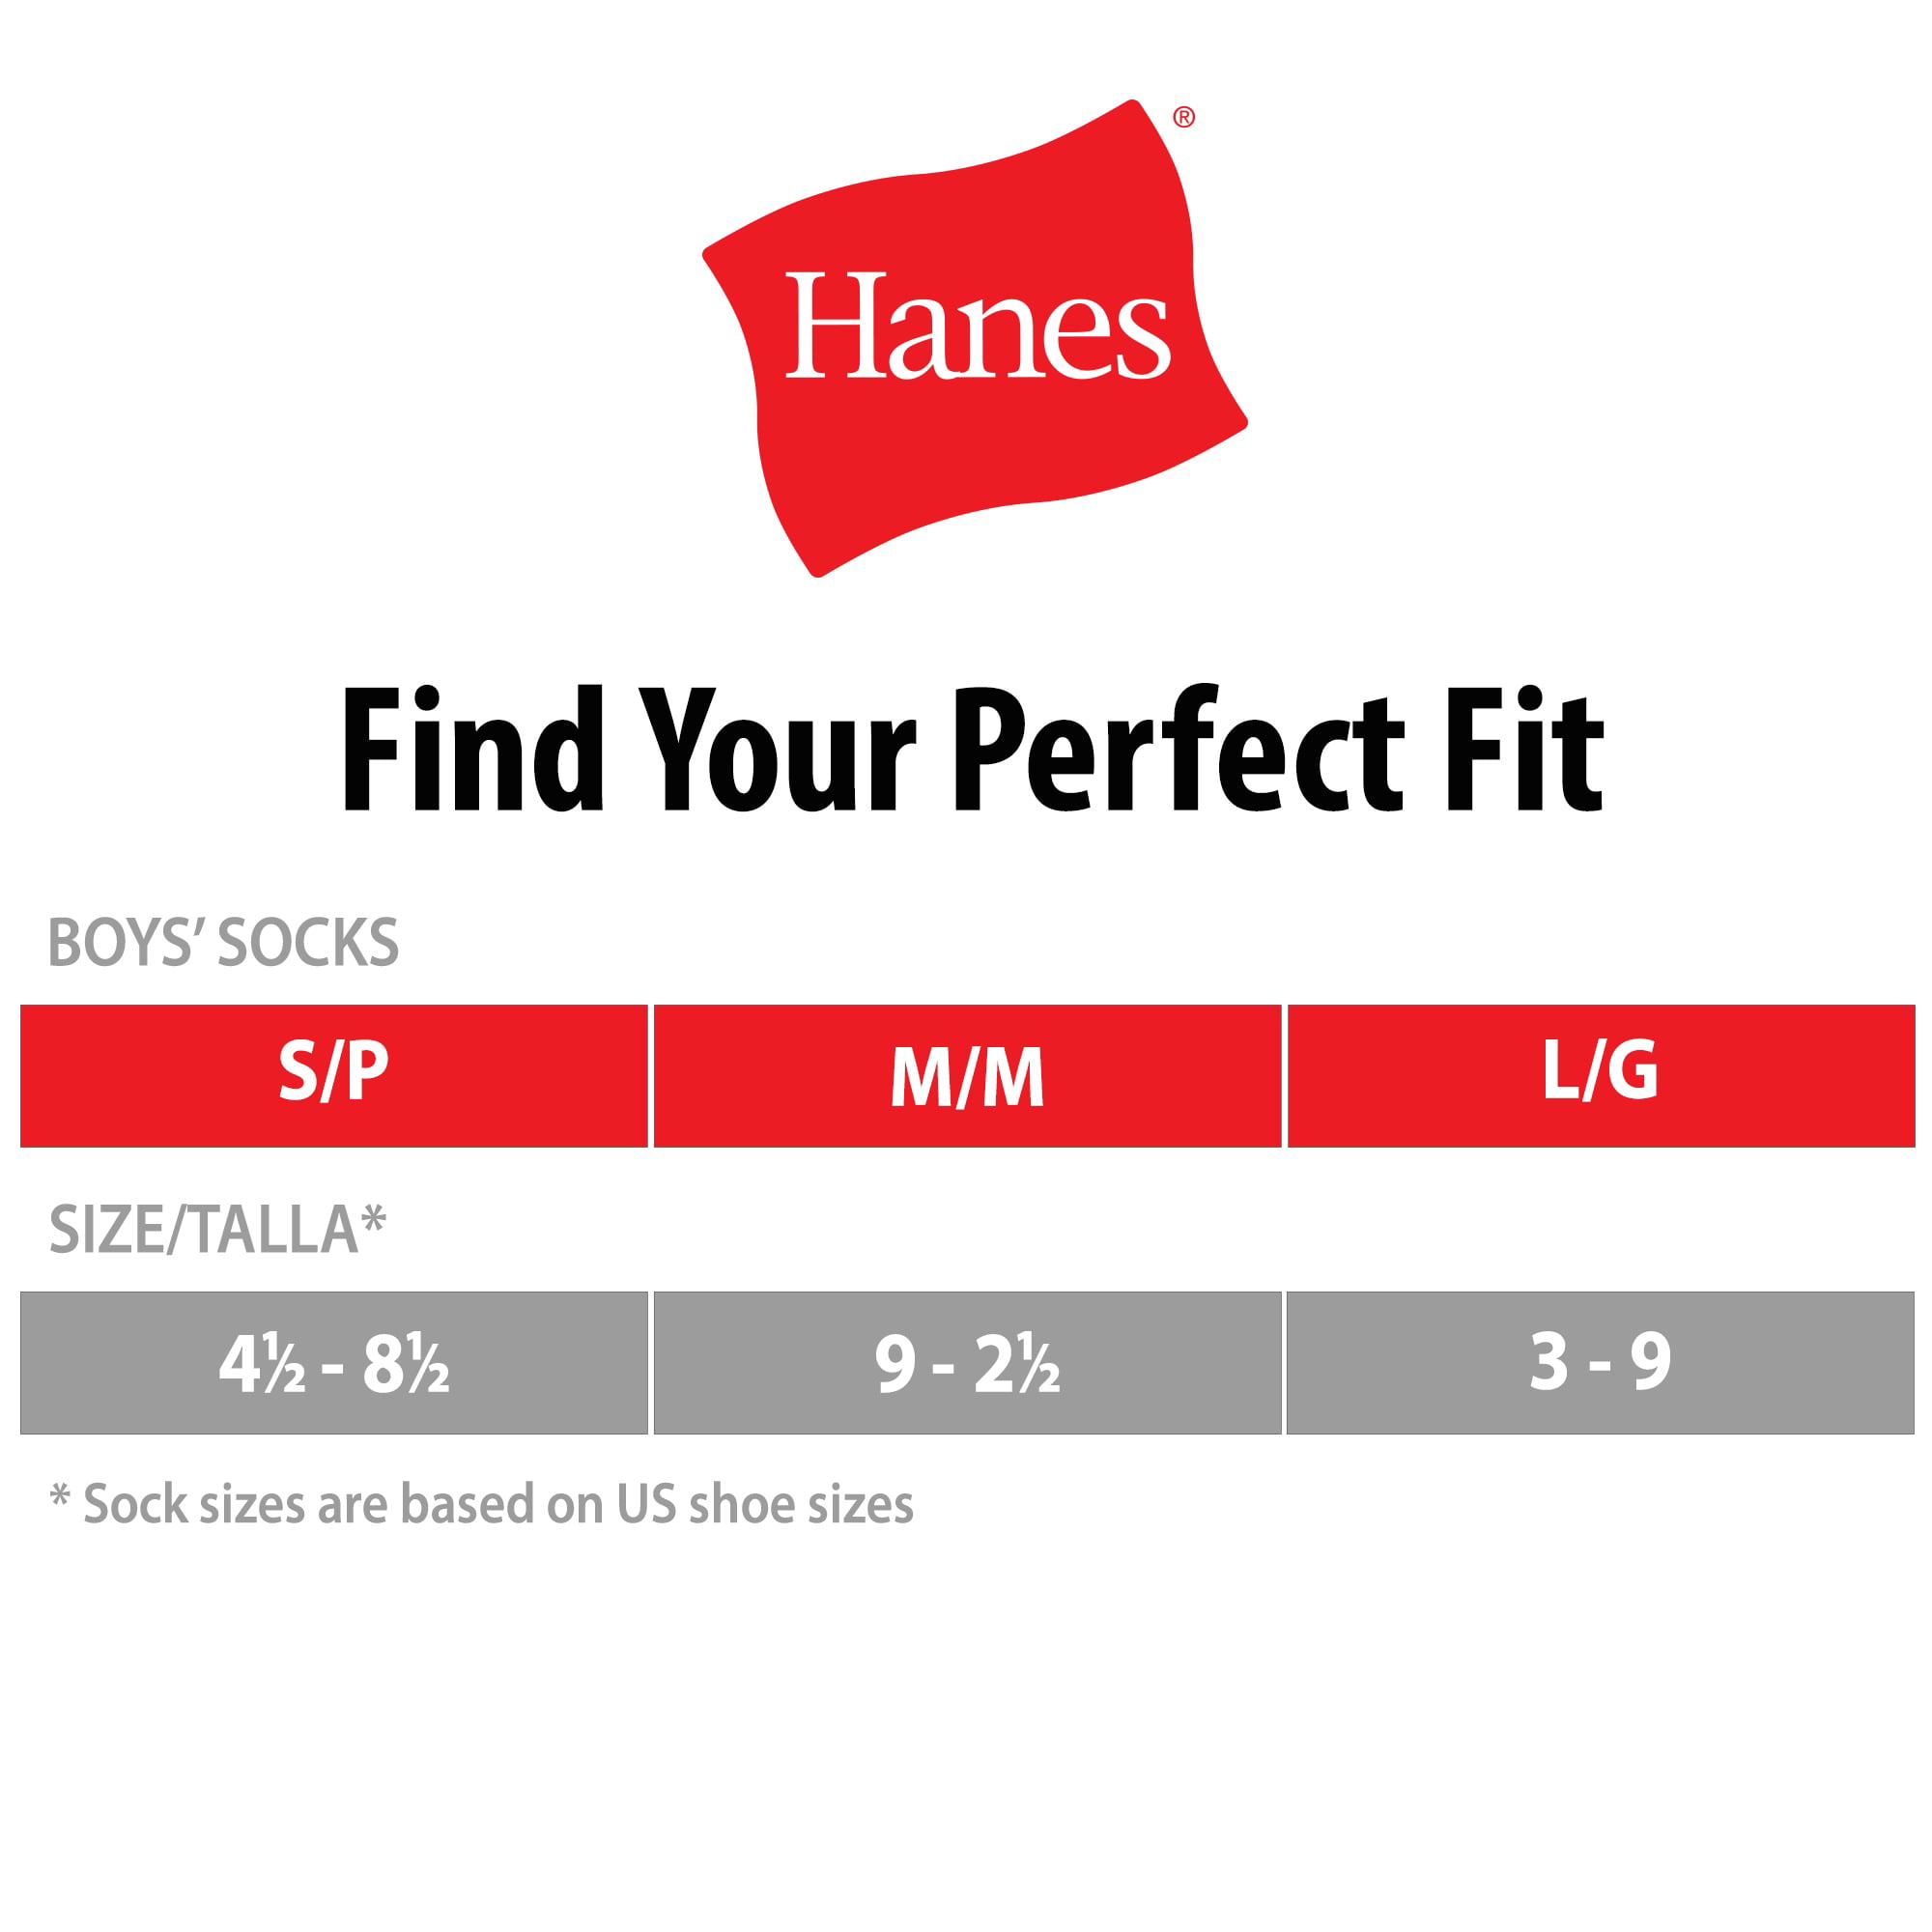 Hanes Thigh Highs Size Chart